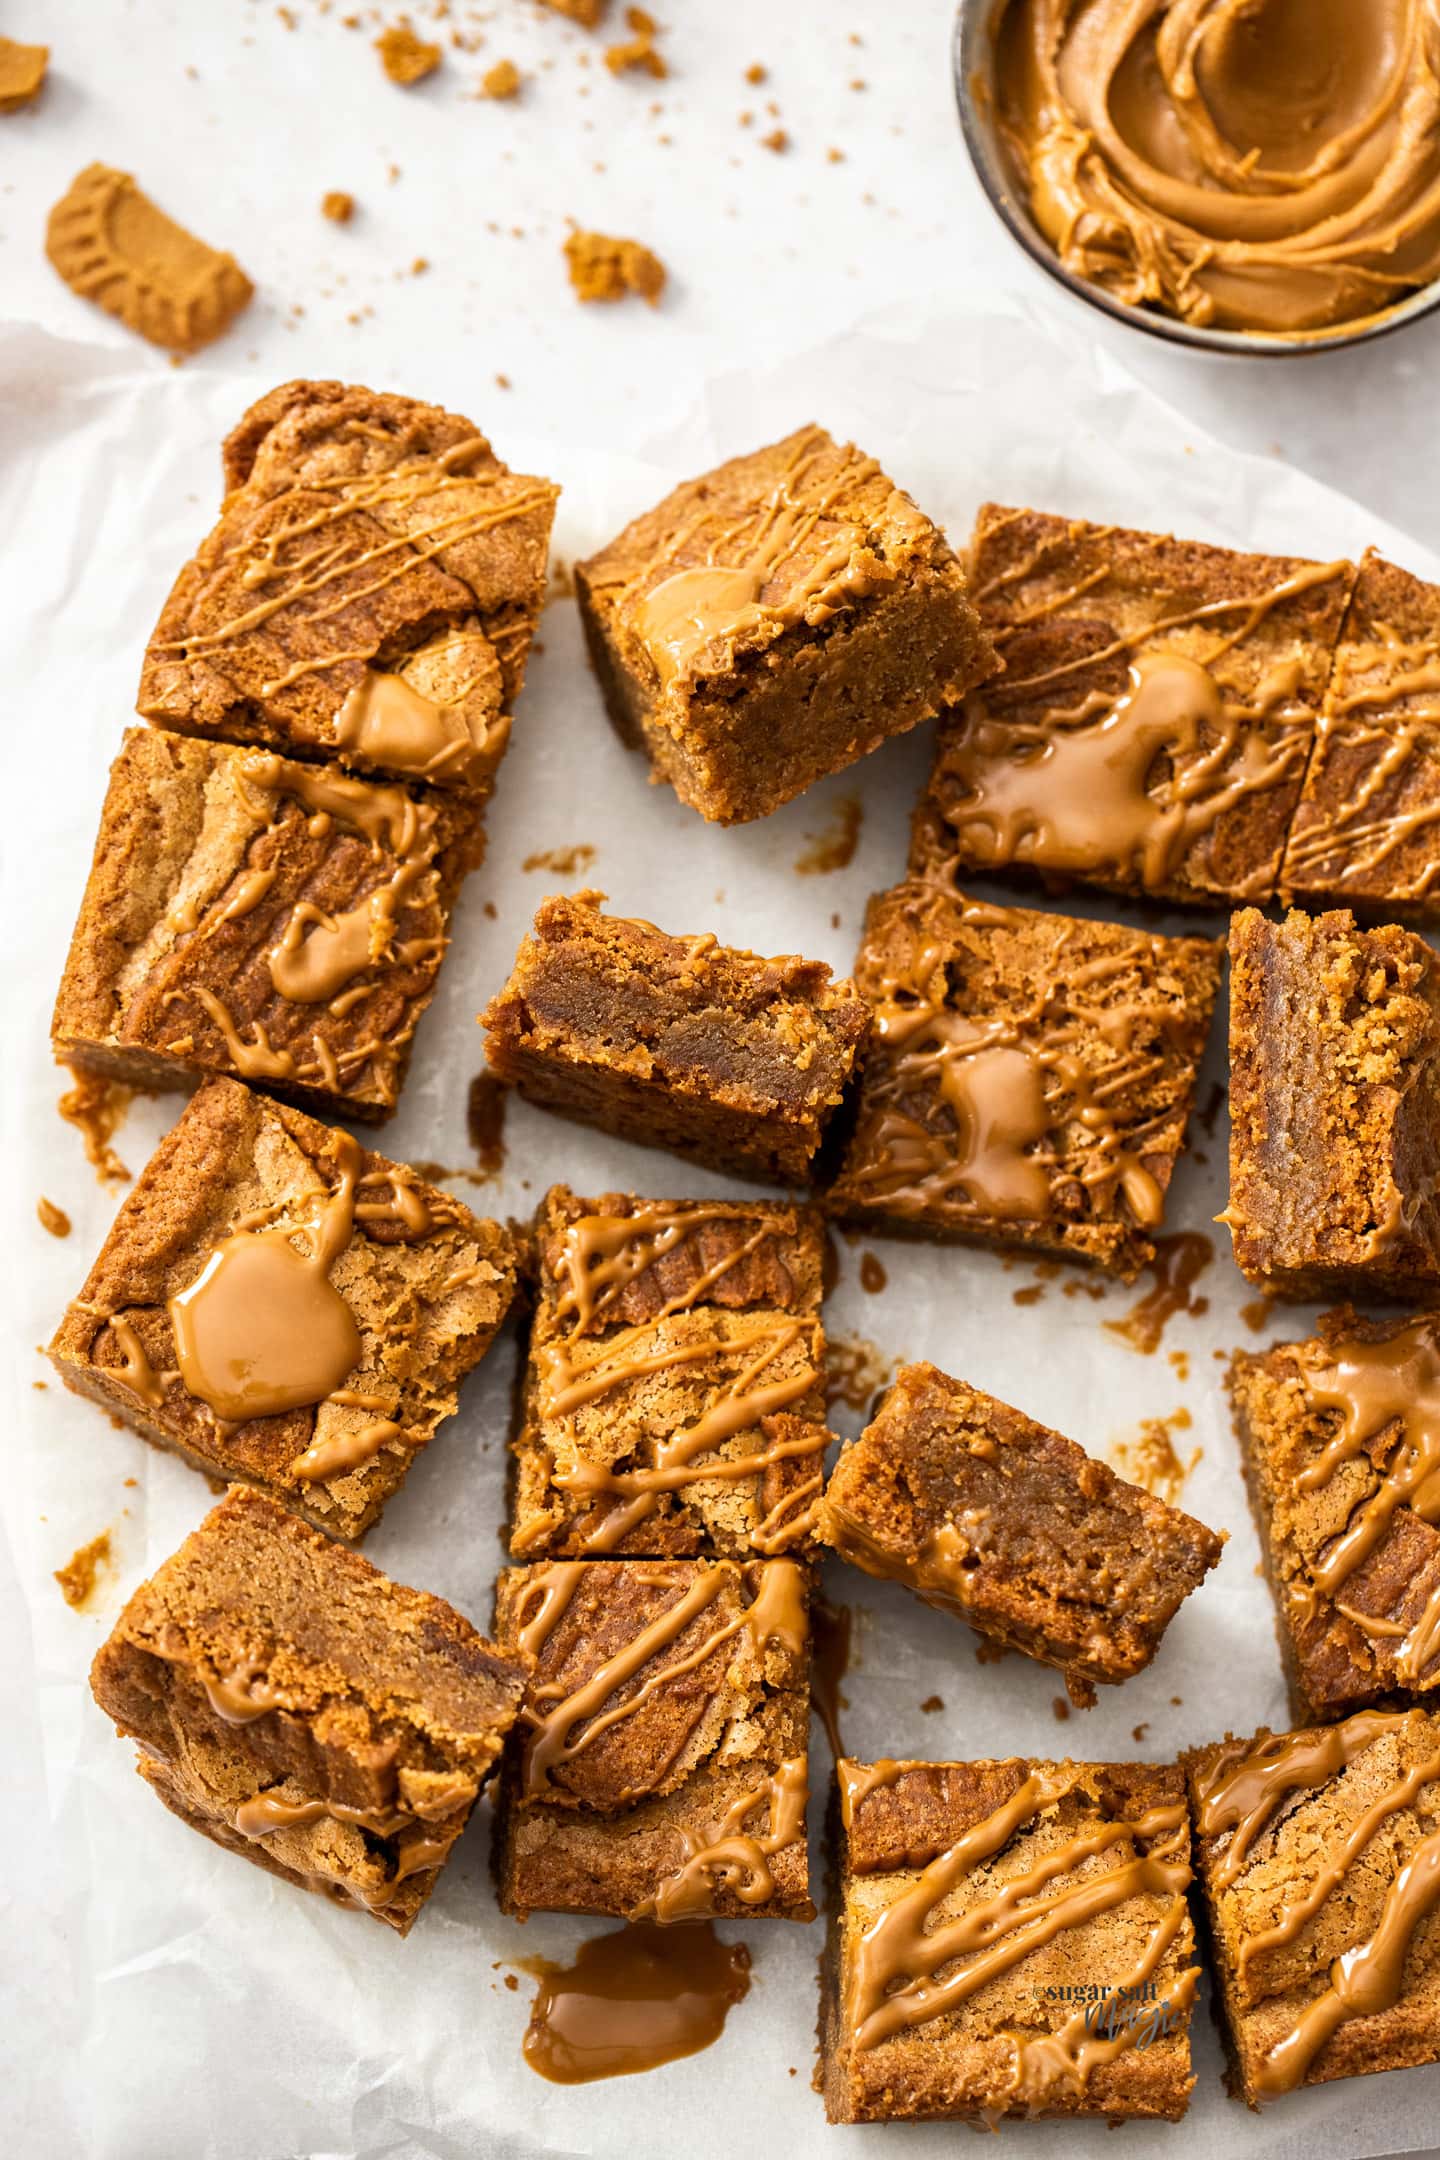 A batch of Biscoff blondies showing the texture of the inside.